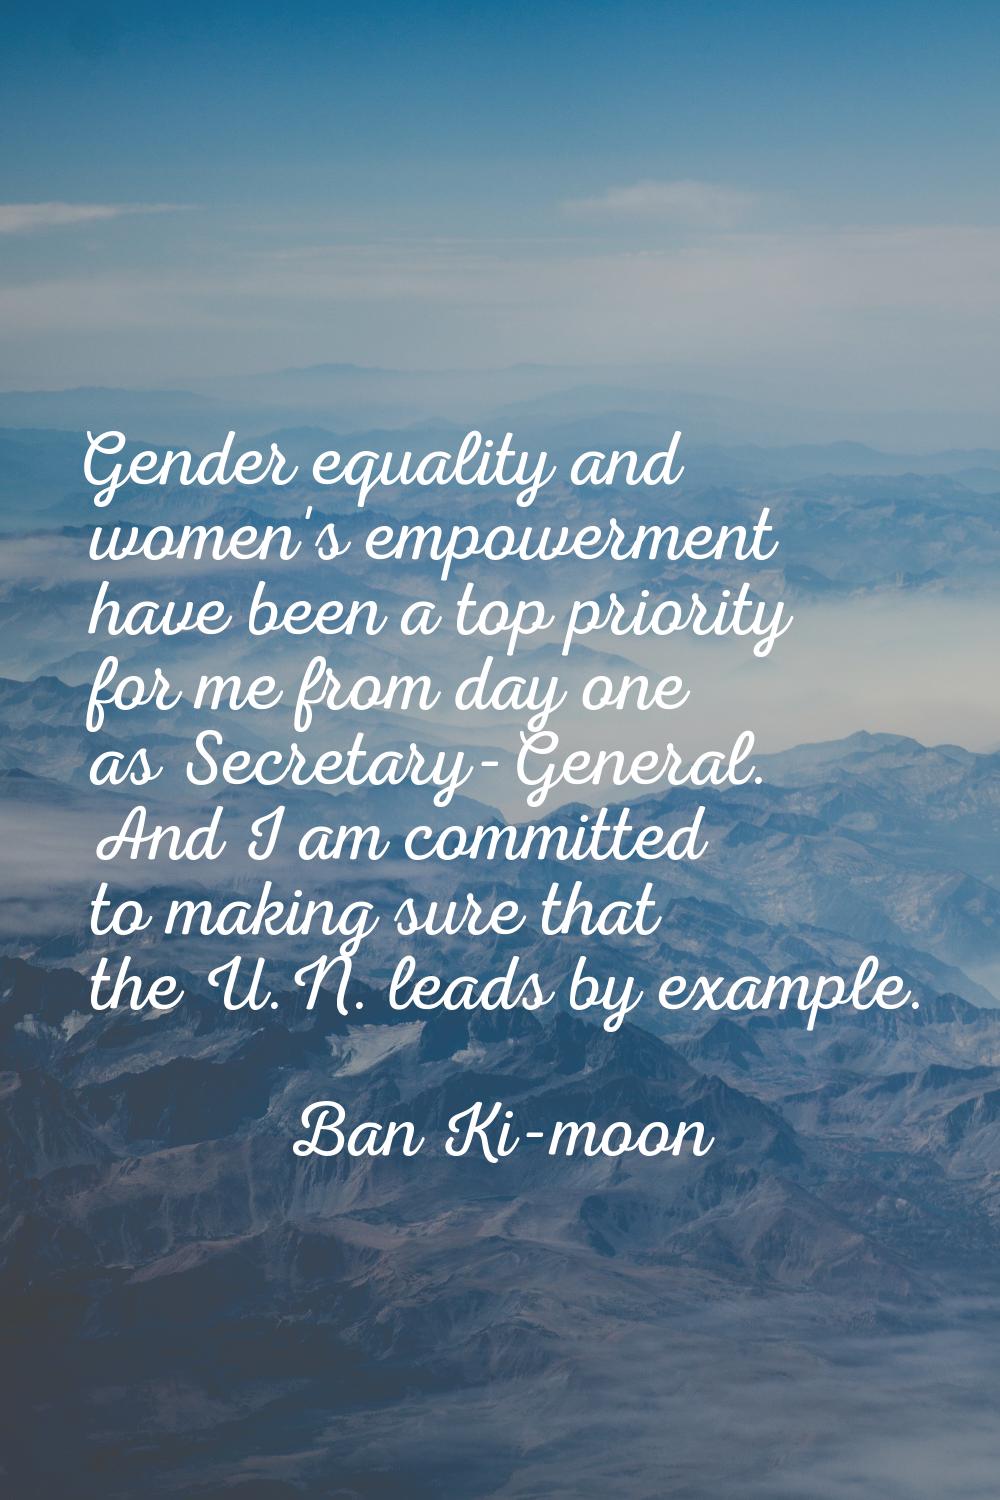 Gender equality and women's empowerment have been a top priority for me from day one as Secretary-G